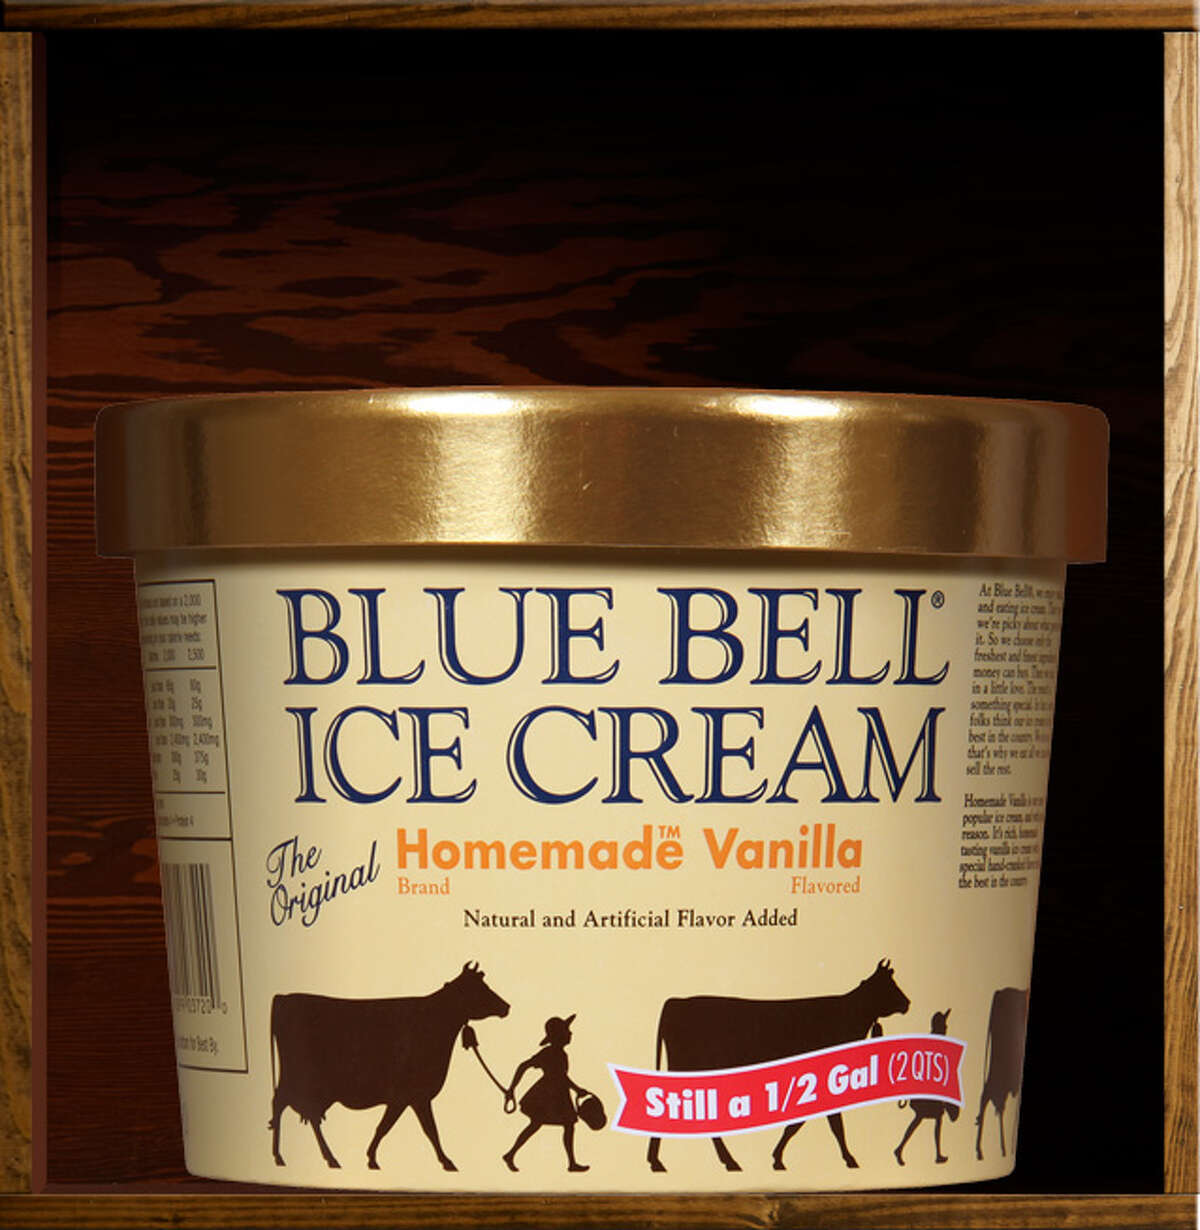 Ranking the best flavors of Blue Bell Ice Cream